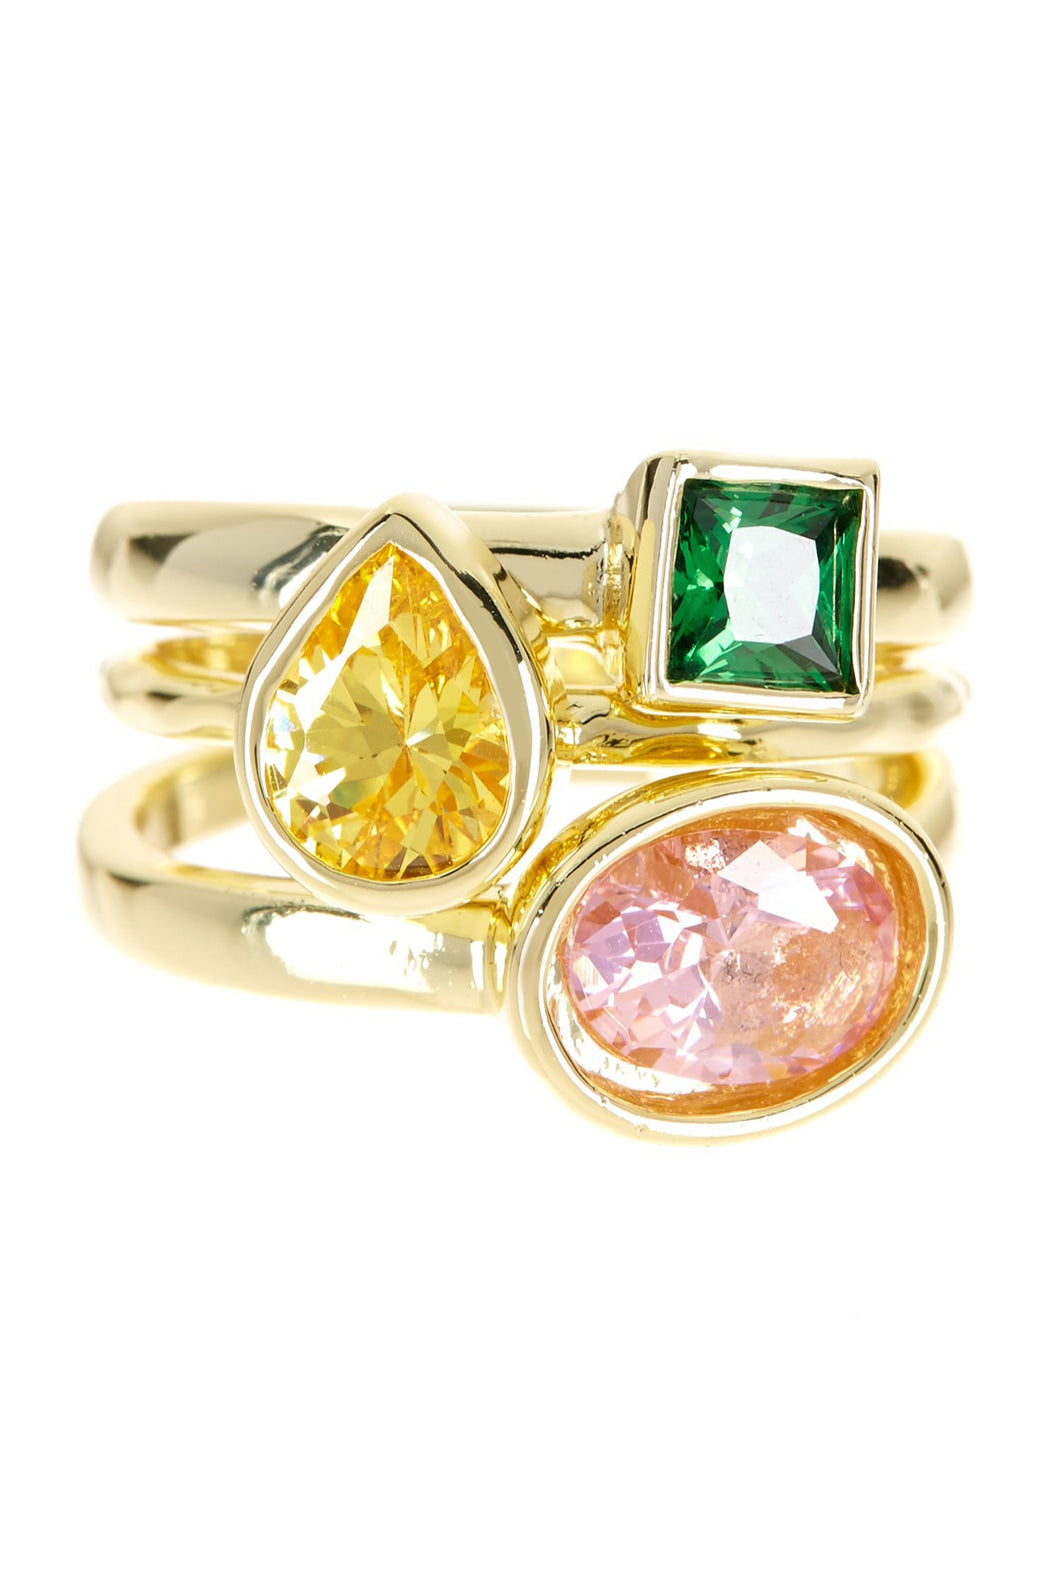 TILLY THREE STACK YELLOW, PINK, GREEN CUBIC ZIRCONIA RING IN GOLD